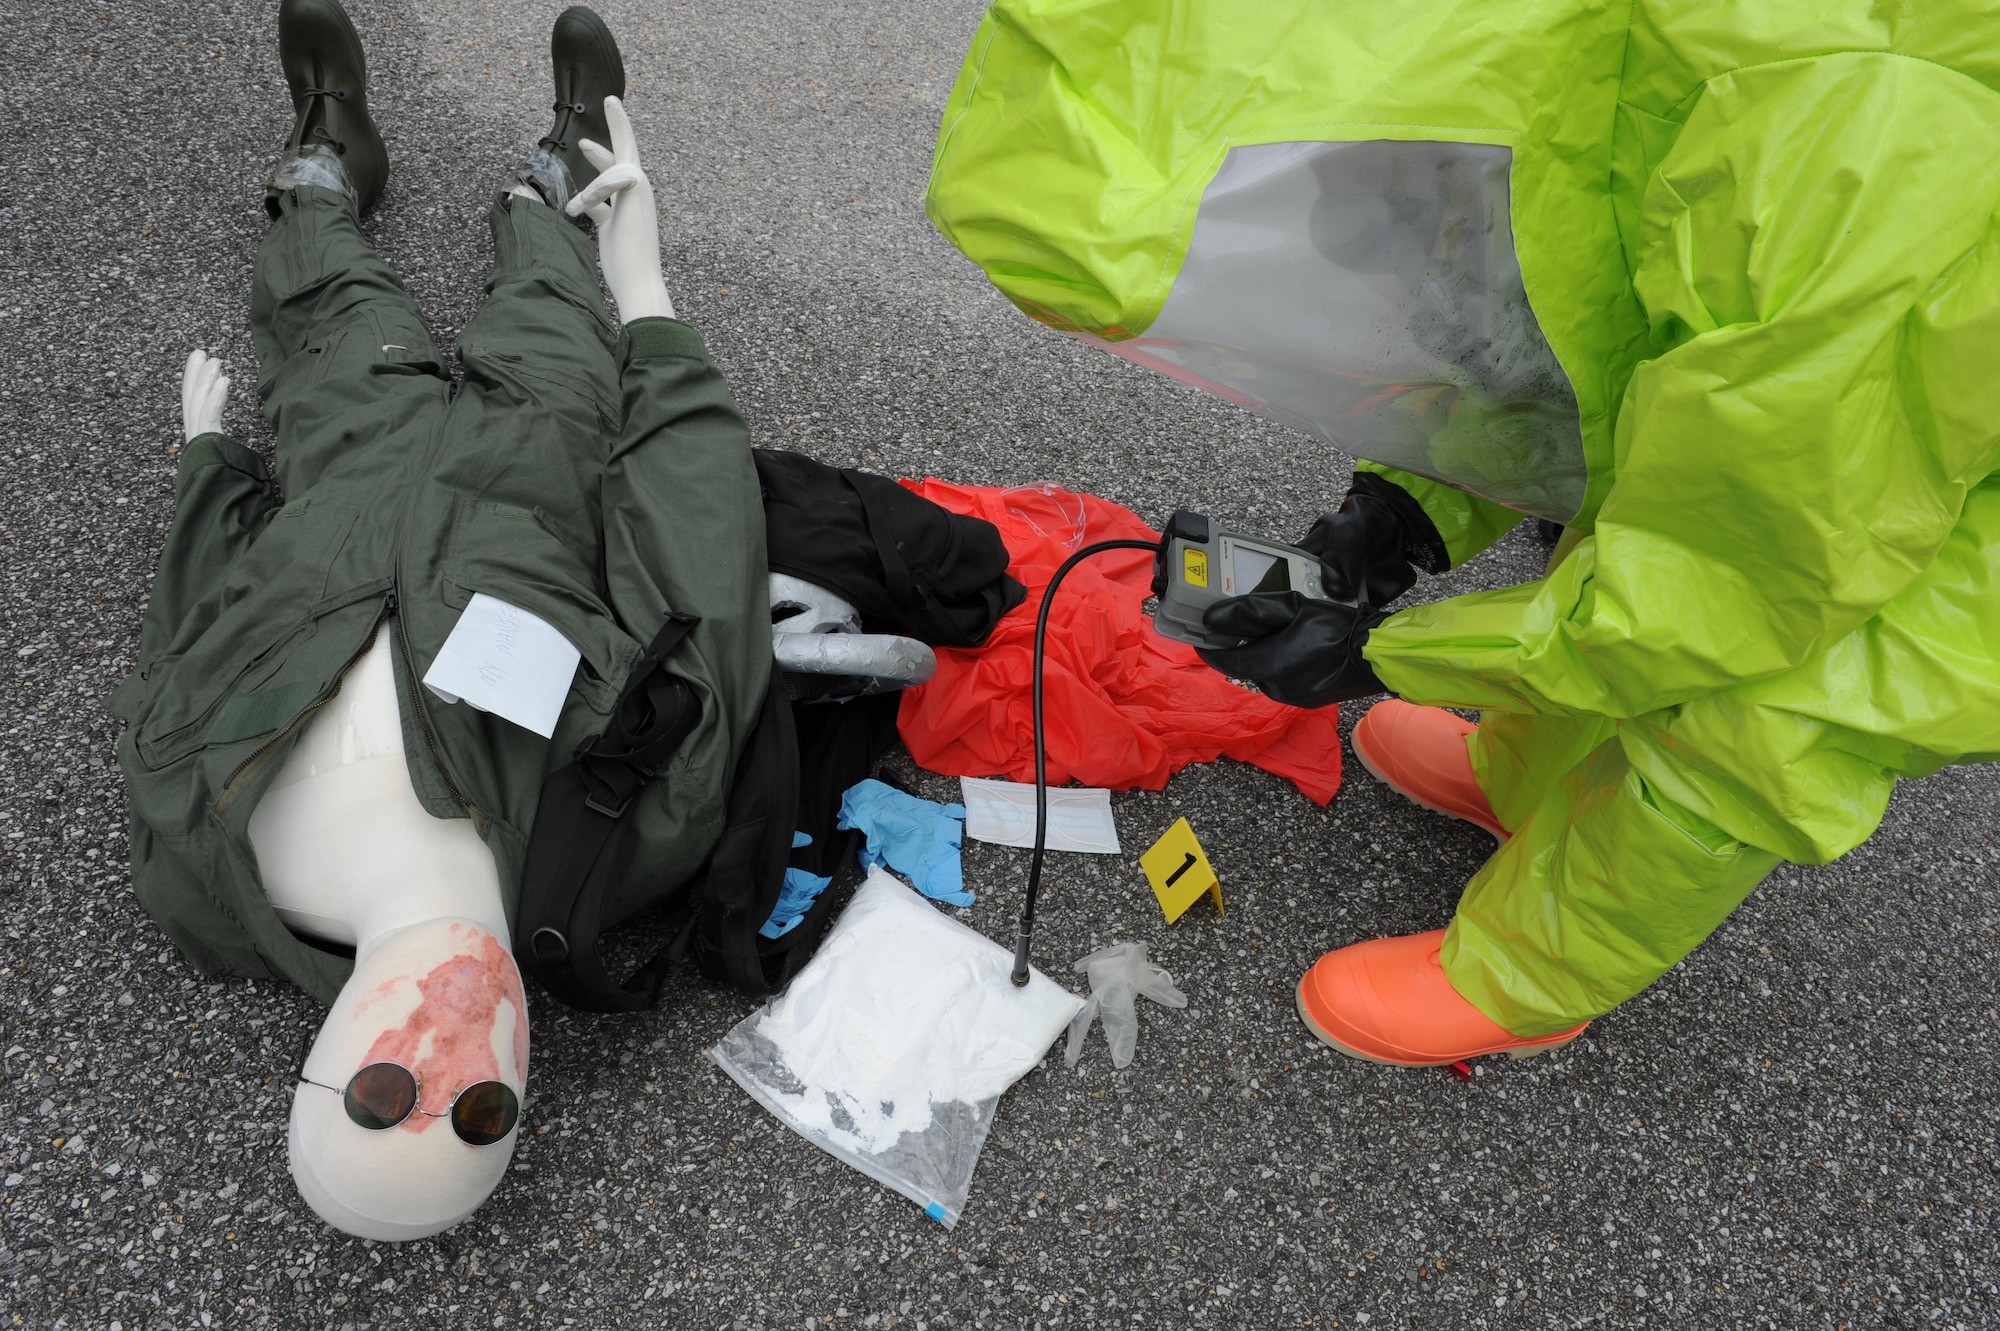 Roger Schwartz, Base Operations Support Emergency Management operations specialist, analyzes the suspected product to identify an unknown substance during a Chemical, Biological, Radiological, Nuclear and Explosive exercise scenario, April 21, 2016, Keesler Air Force Base, Miss. The Force Protection Condition exercise scenario simulated an intruder entering the hazardous waste 90-day accumulation site, where an explosion occurred causing a mass casualty event. The exercise tested the base’s capability to react to and recover from a mass casualty event. (U.S. Air Force photo by Kemberly Groue)